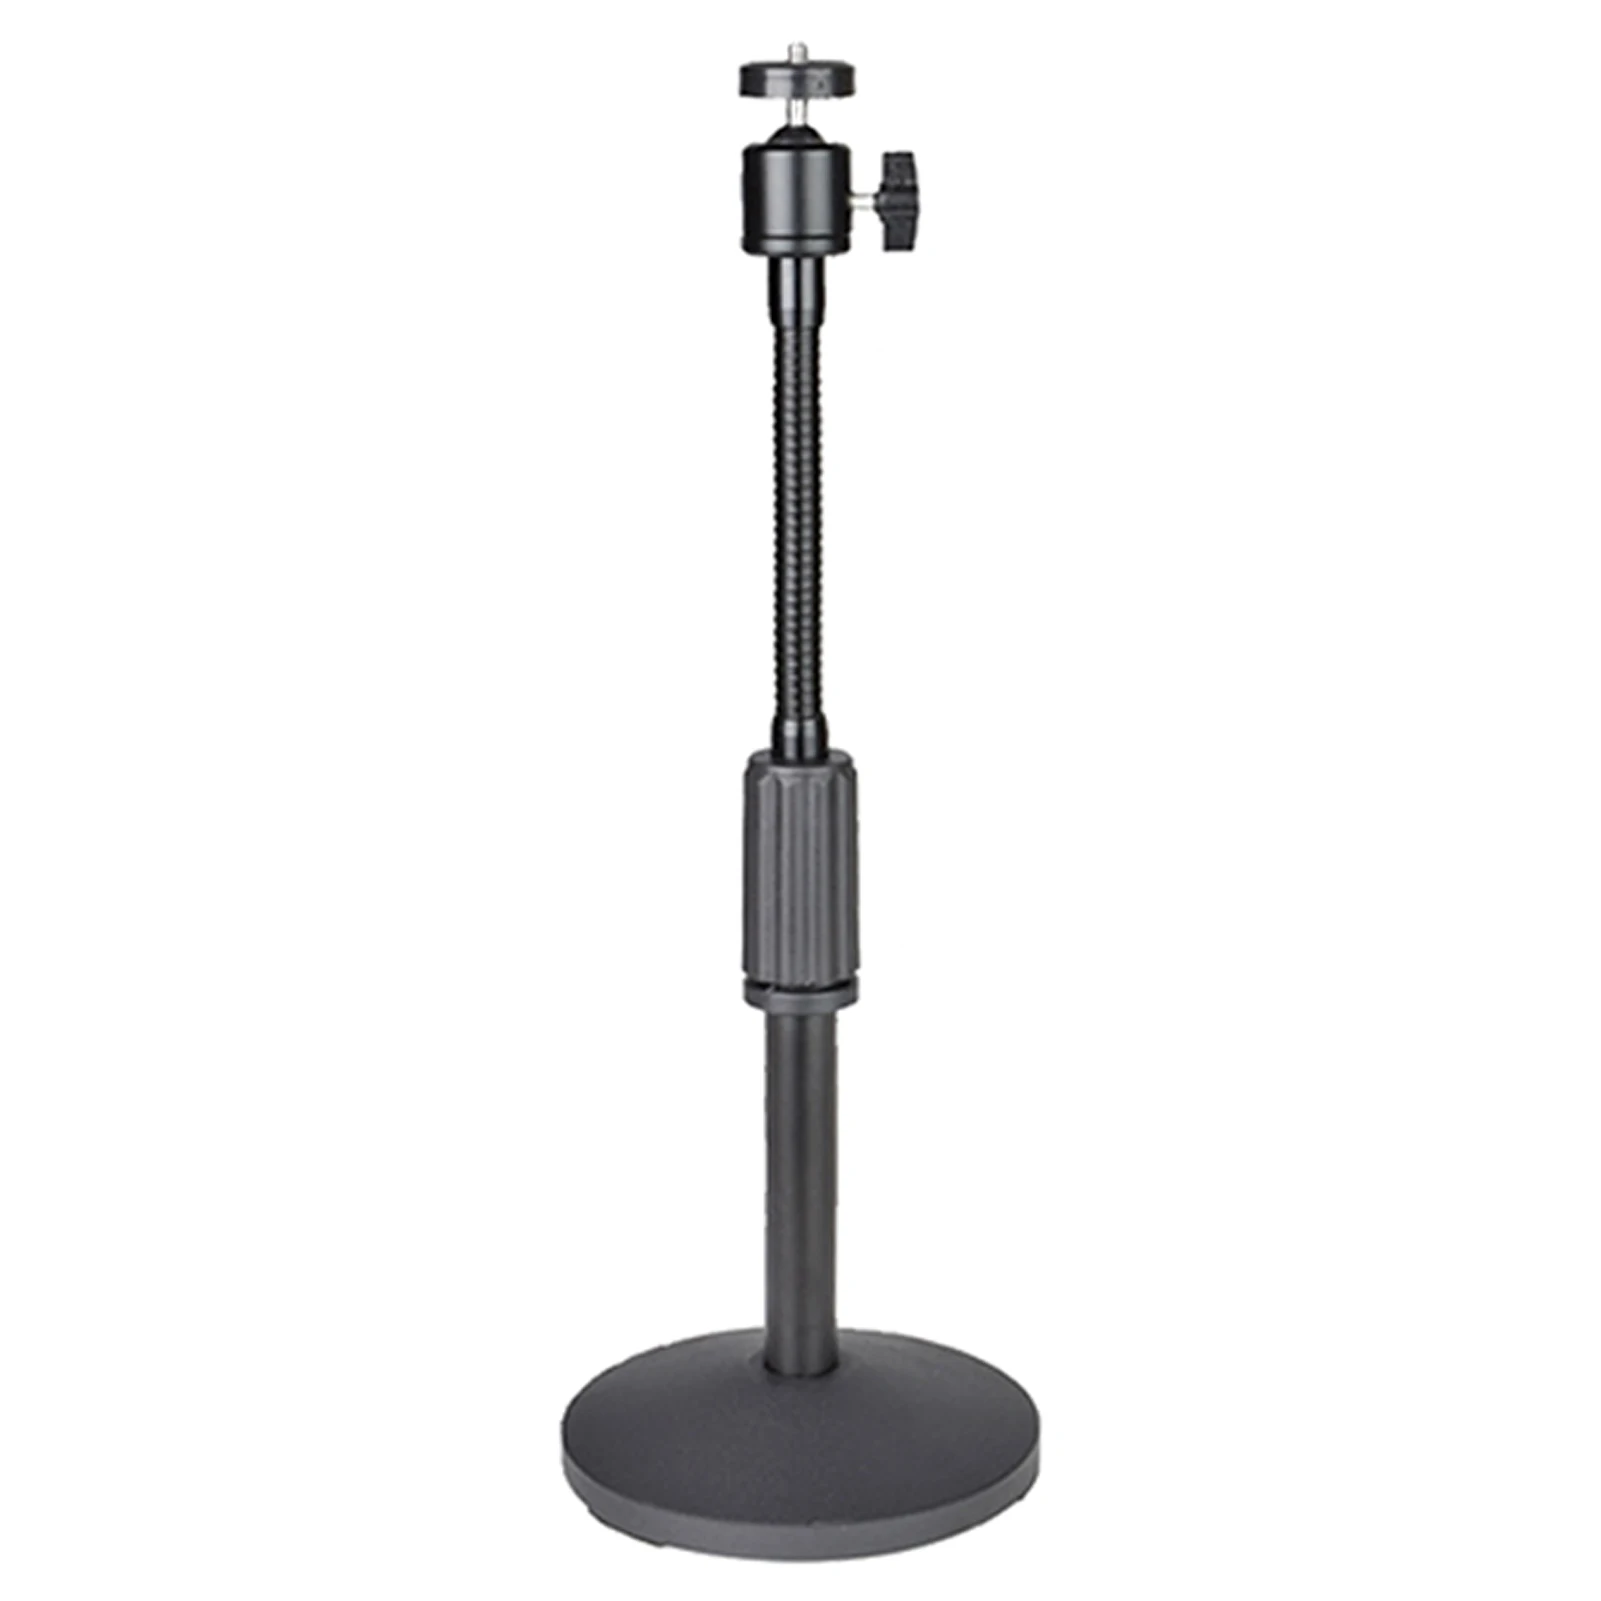 

Clamp Webcam Stand Adjustable Universal Vertical Camera Mount Lazy Bracket Quick Release Easy Install Black Tripod Flexible